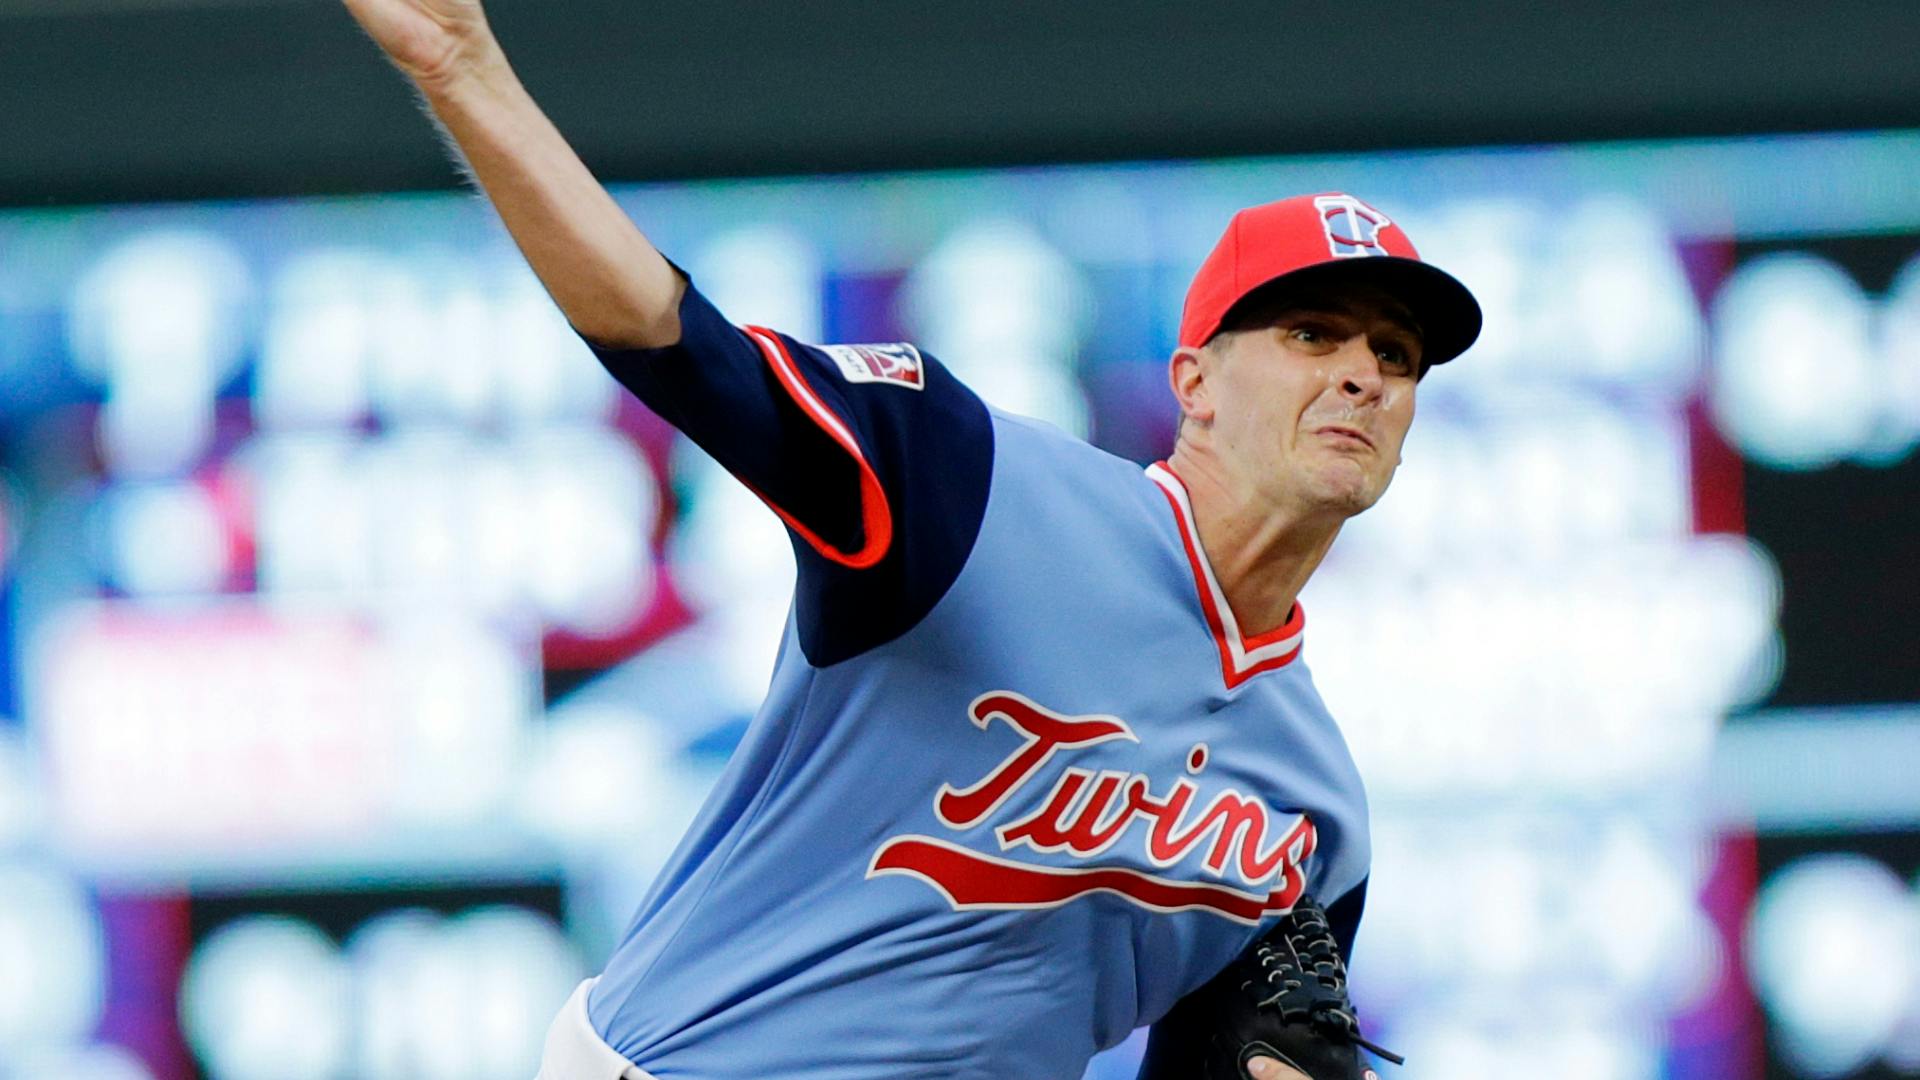 Twins righthander Jake Odorizzi says he told Paul Molitor that he wanted to stay in for the seventh inning Friday, something he hadn't done since last September.